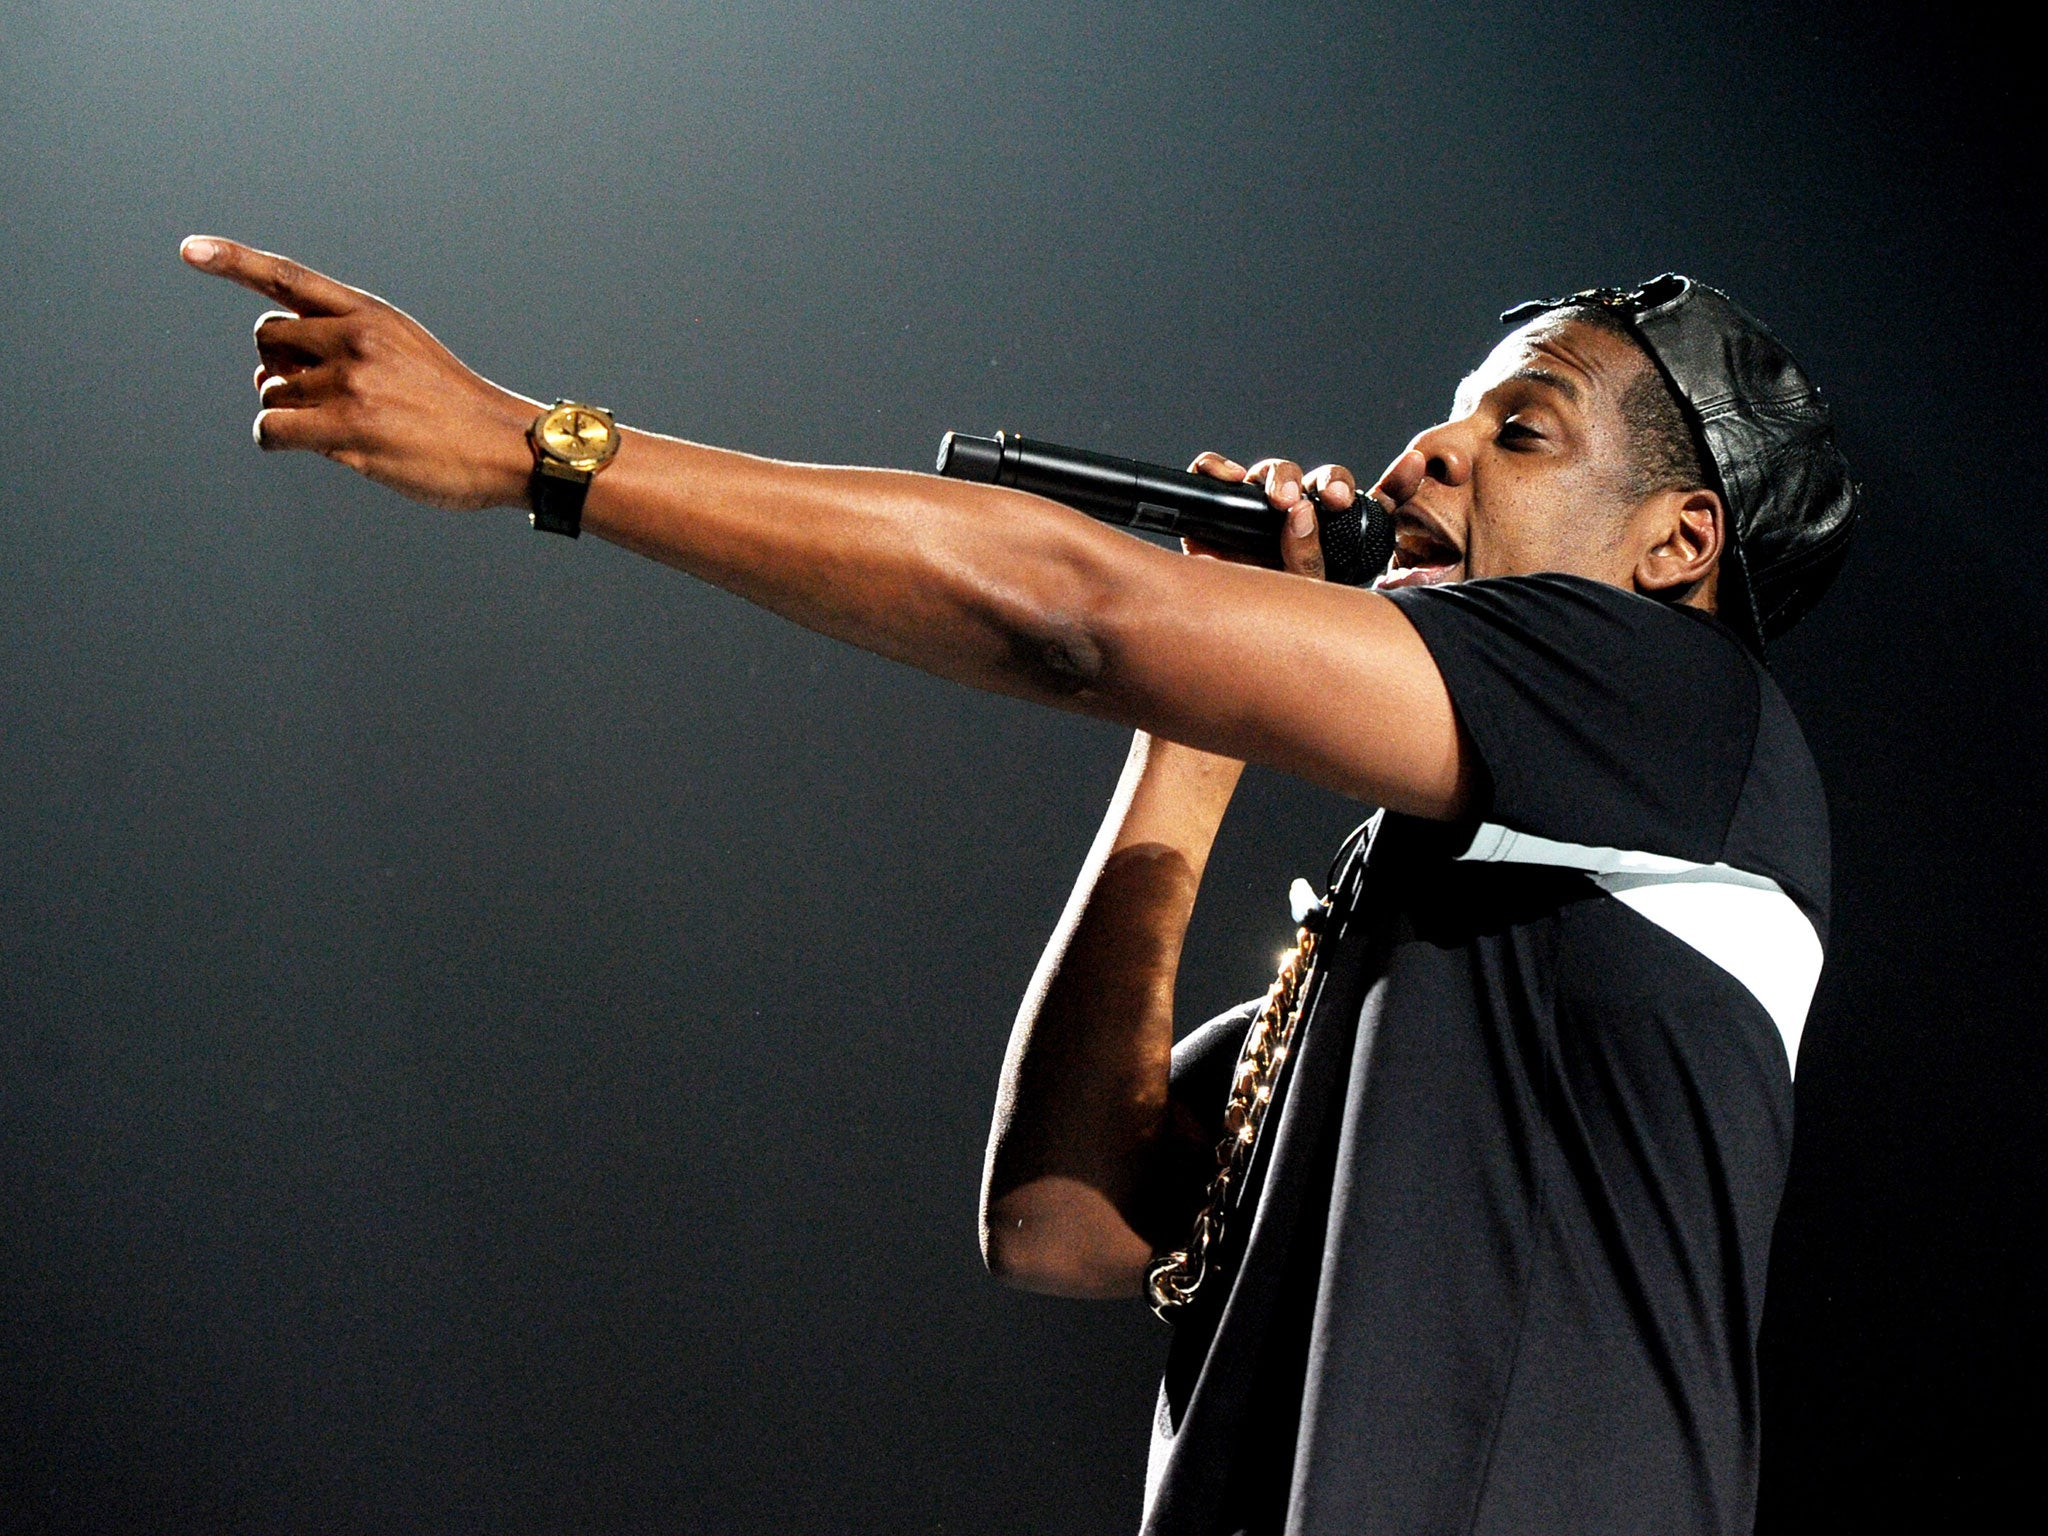 Jay Z performs at The Staples Center on 9 December, 2013, in Los Angeles, California